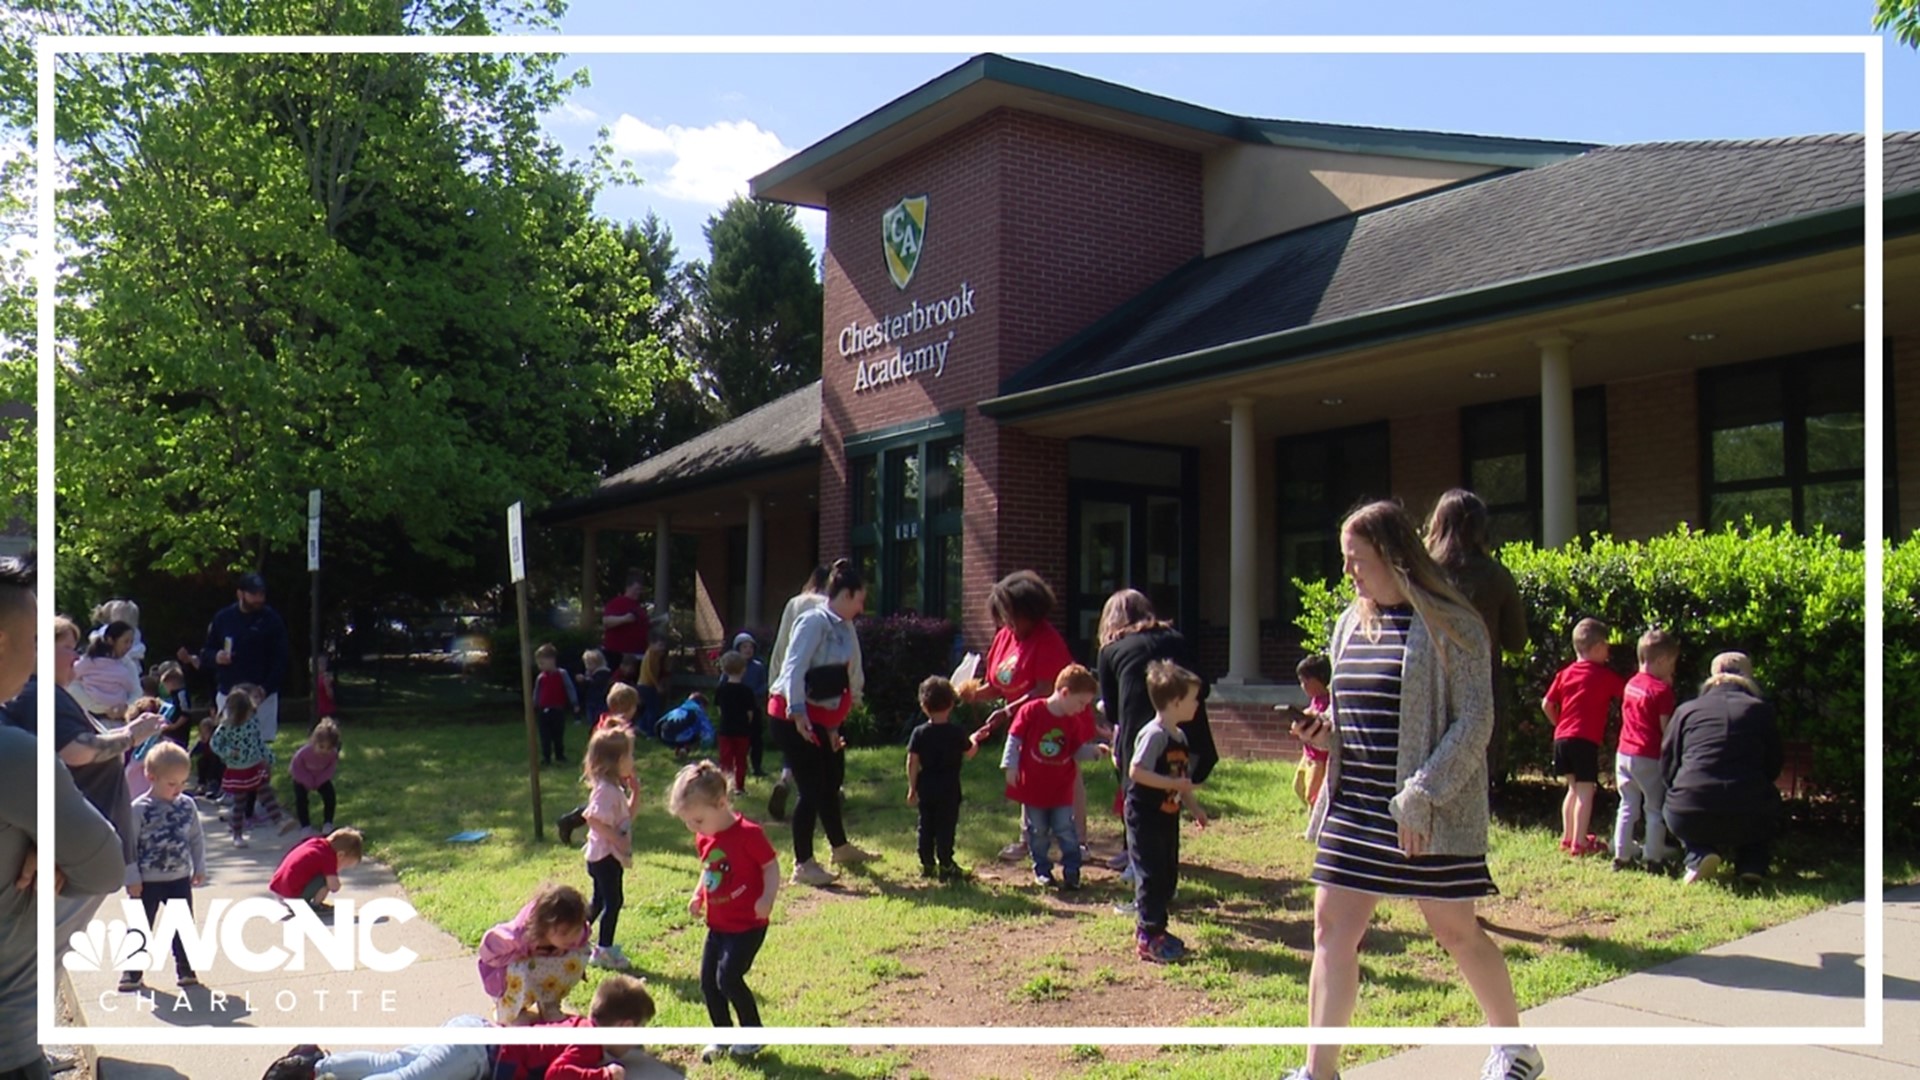 On Earth Day, students at Chesterbrook Academy Preschool released 8,000 ladybugs around the bushes and trees in their schoolyard.